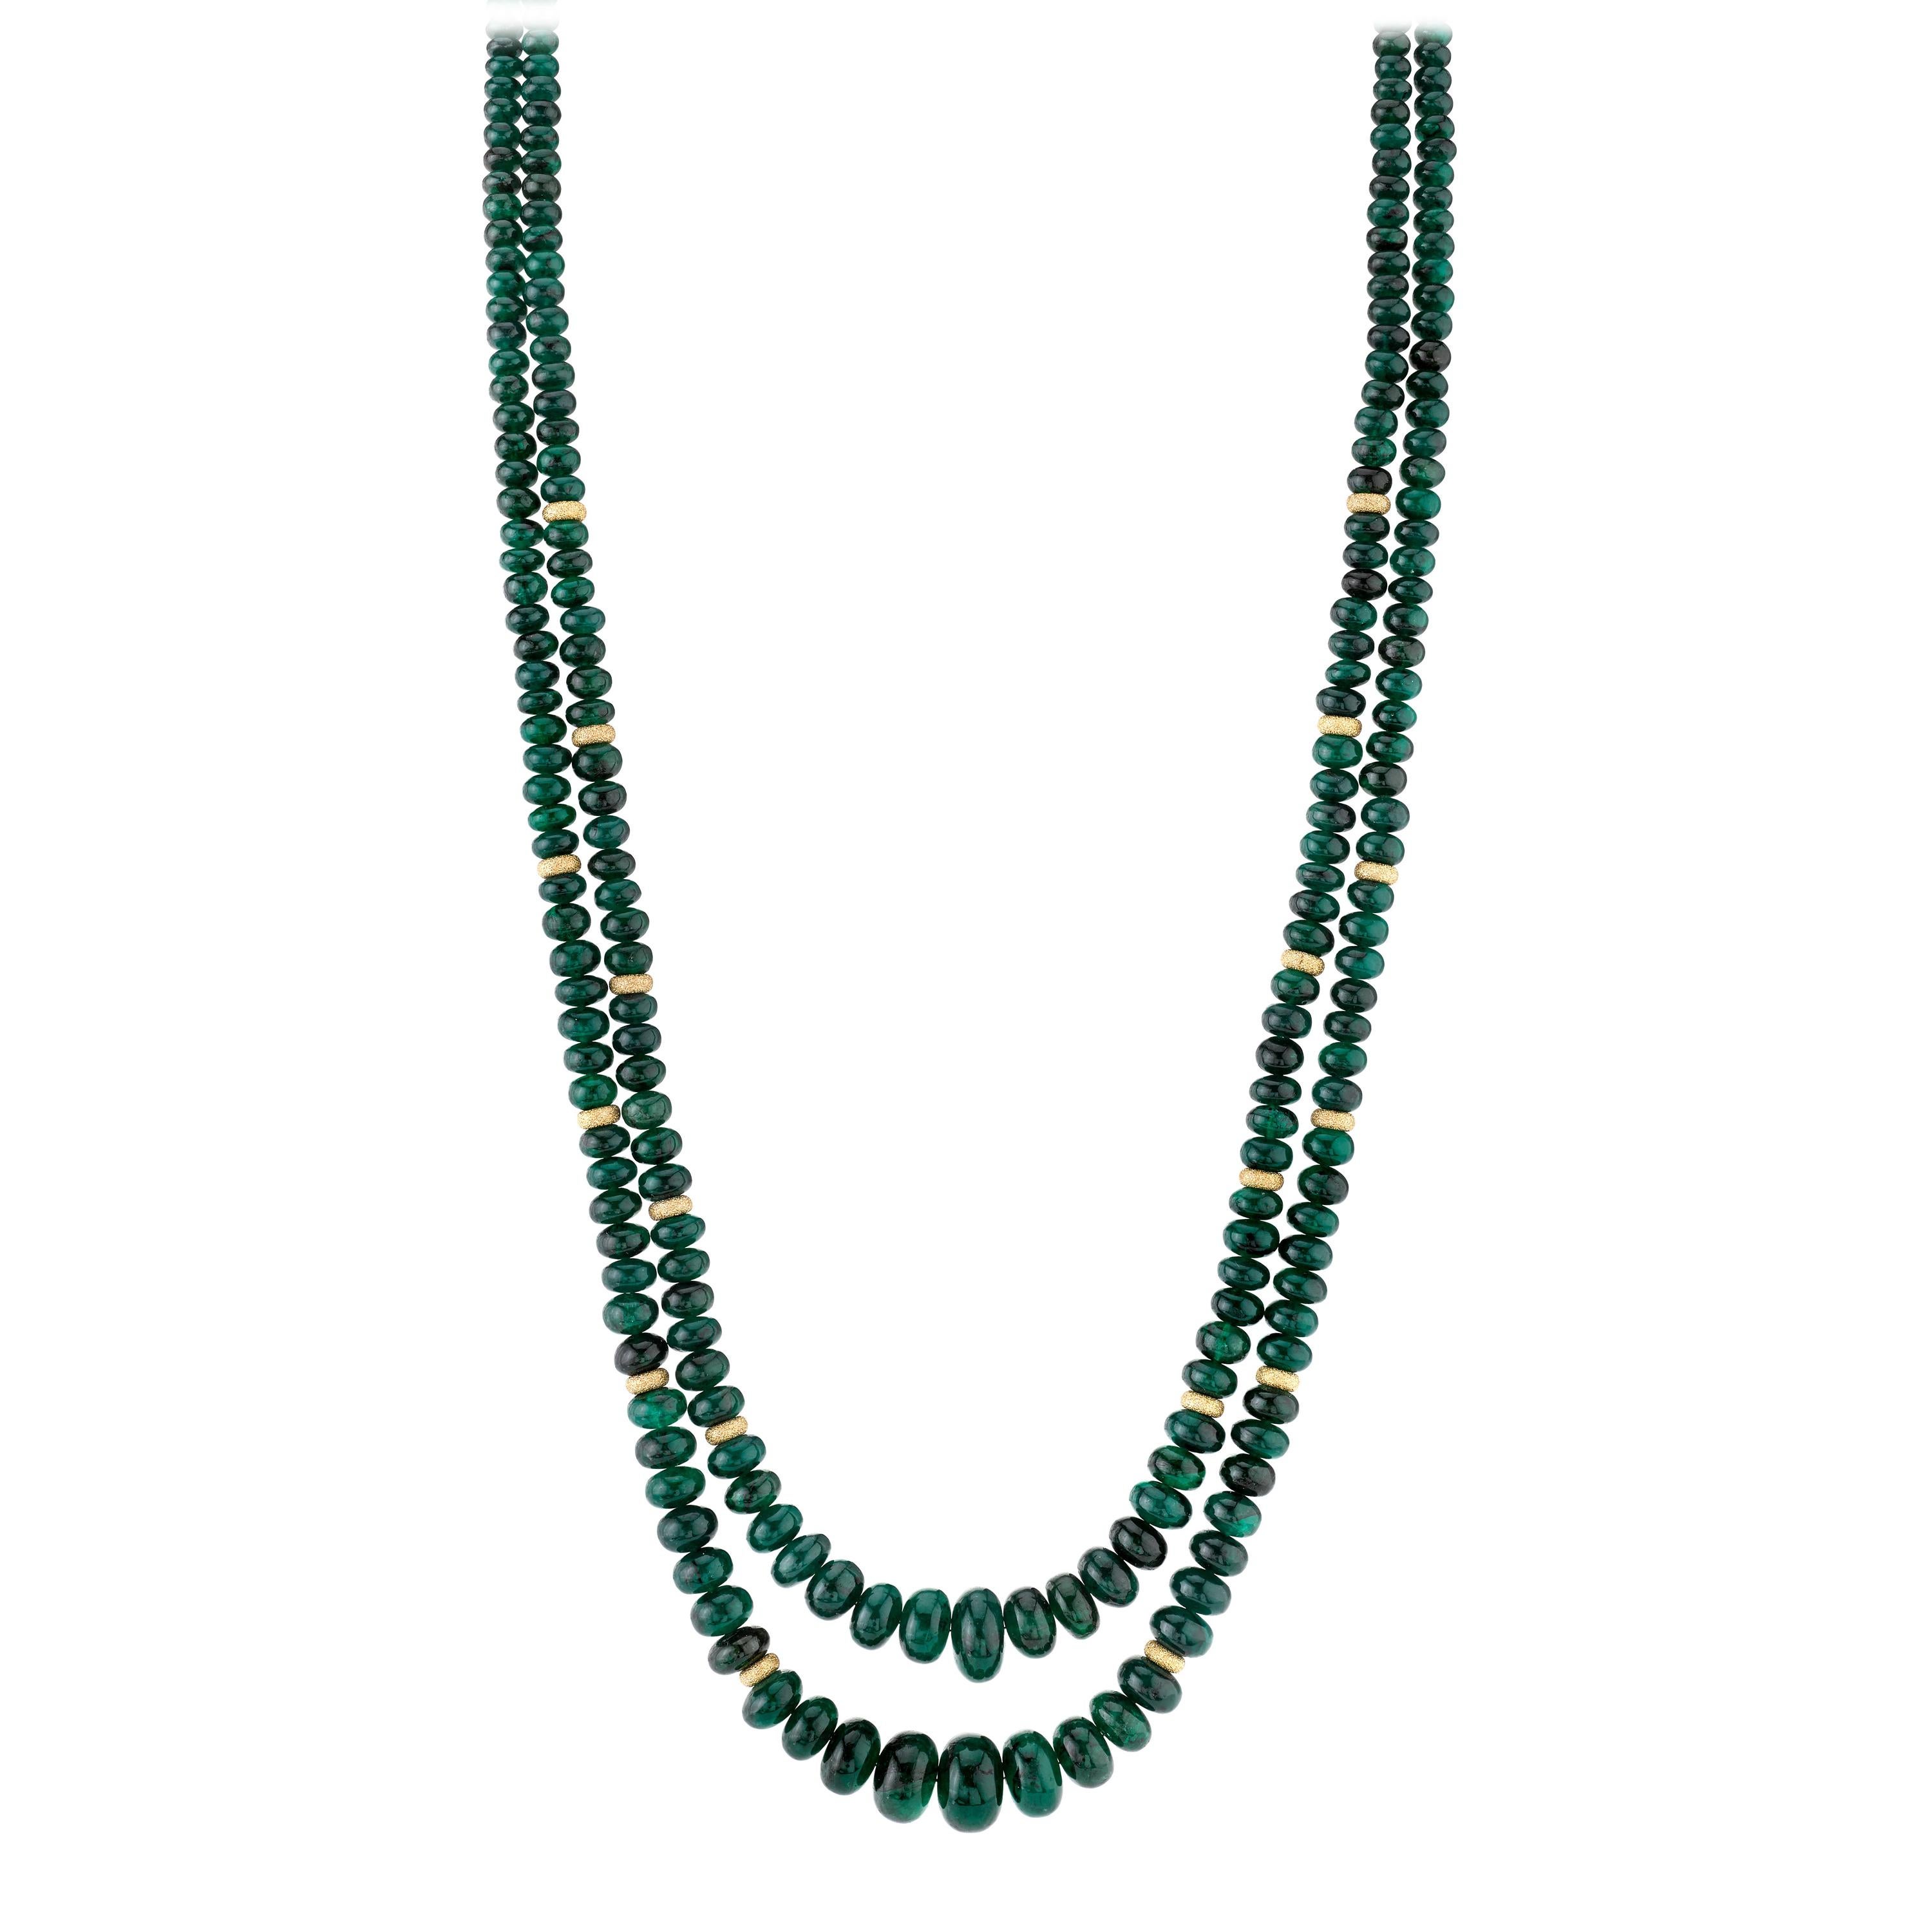  Emerald Beaded Multi-Strand Necklace with Yellow Gold Accents, 200 Carats Total